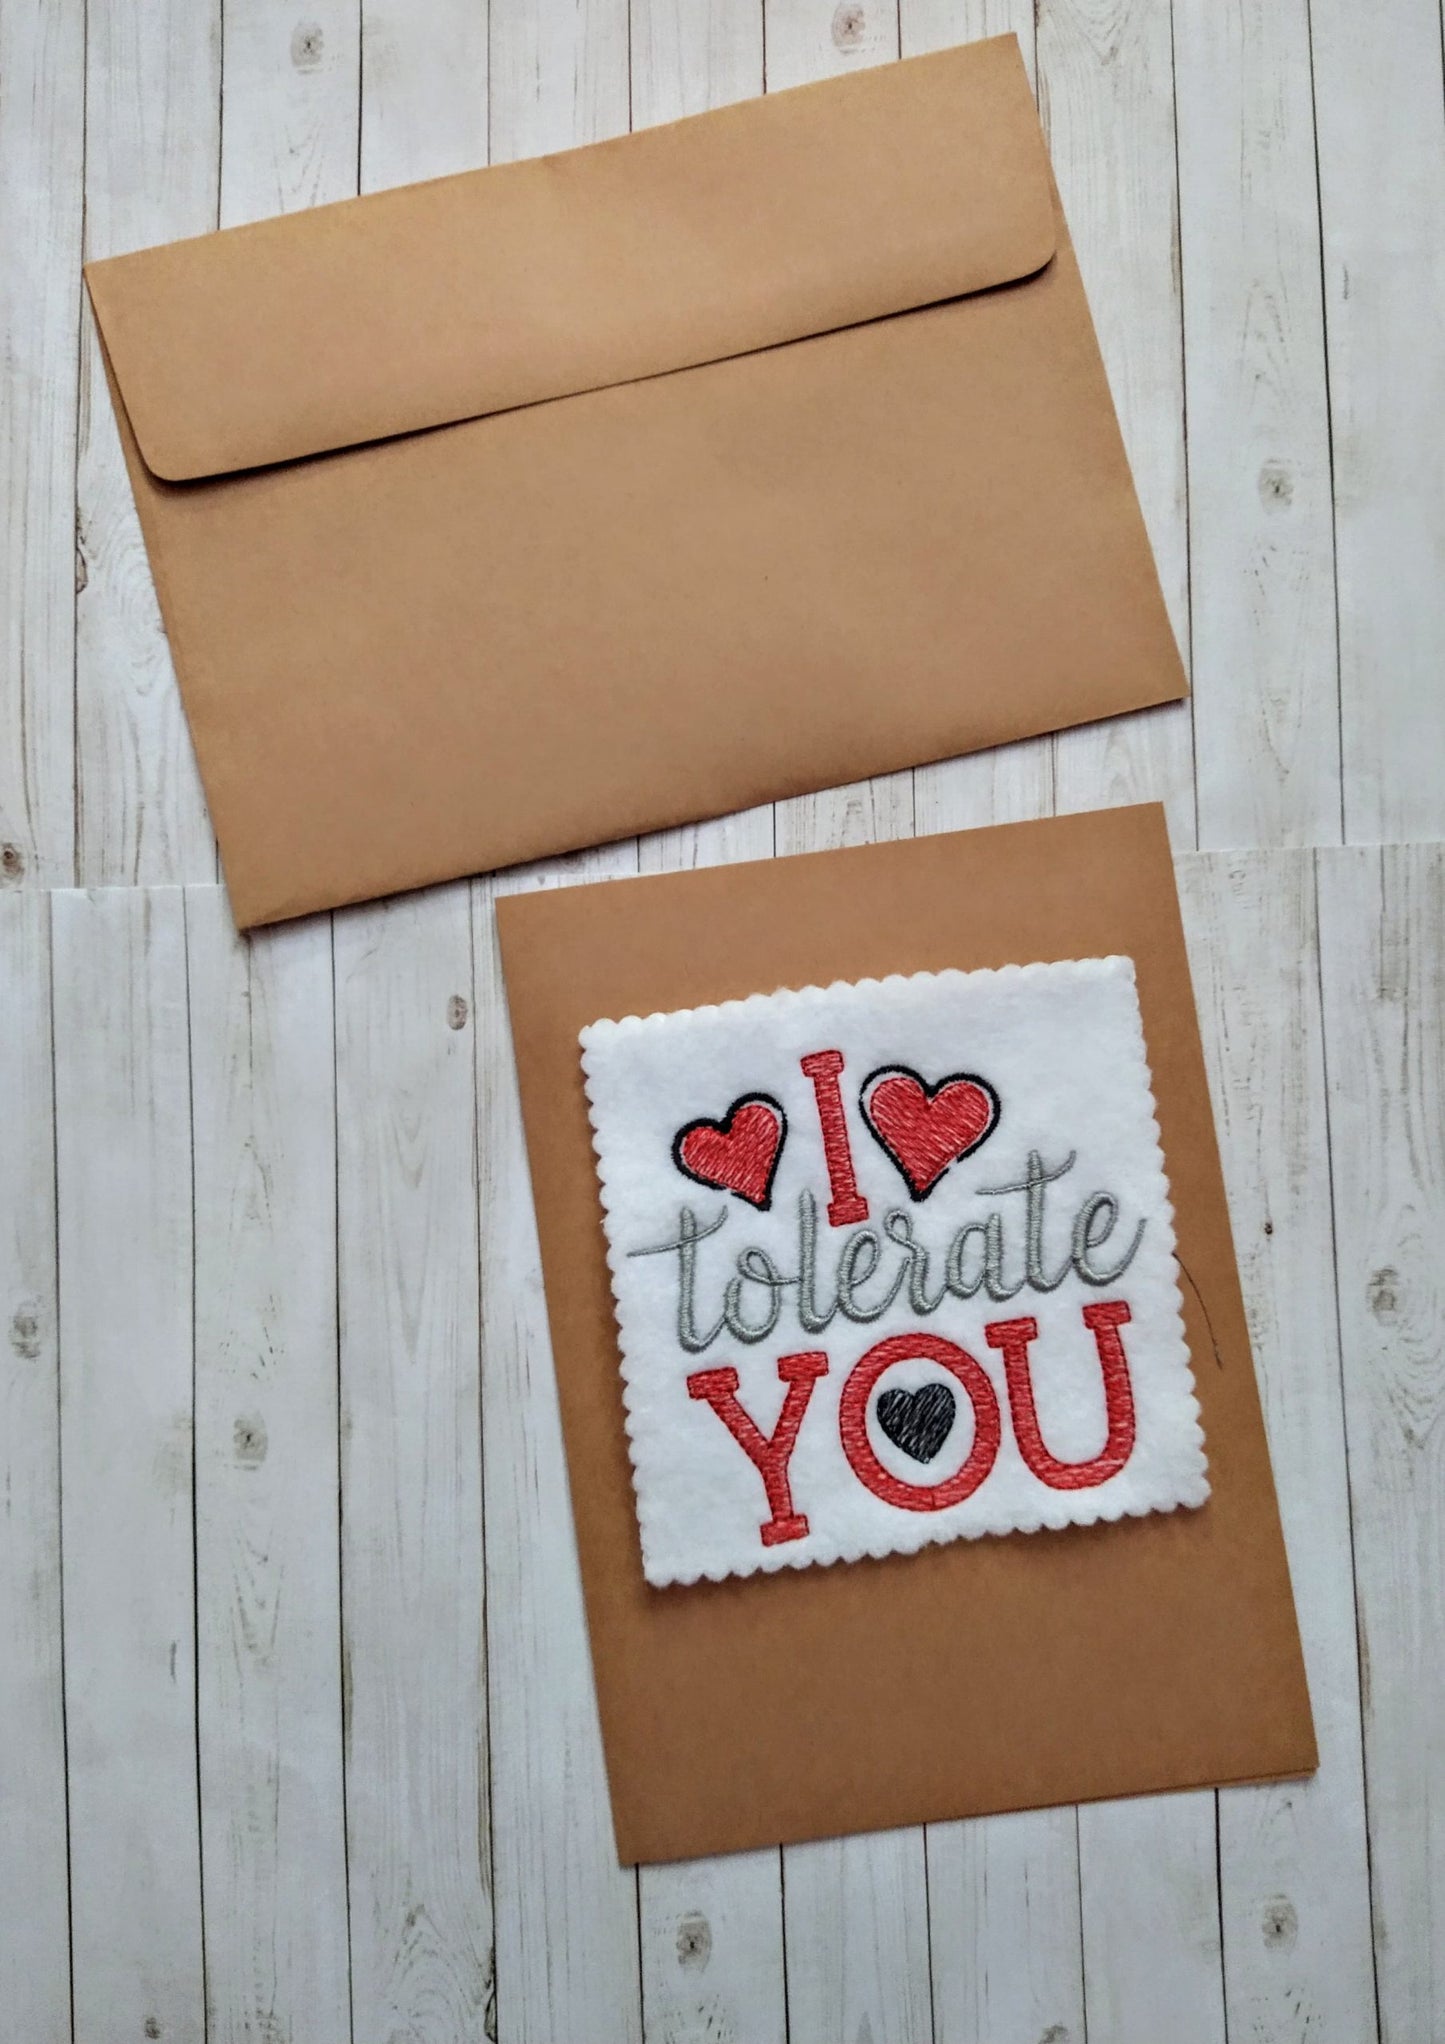 I Tolerate You - 3 sizes- Digital Embroidery Design